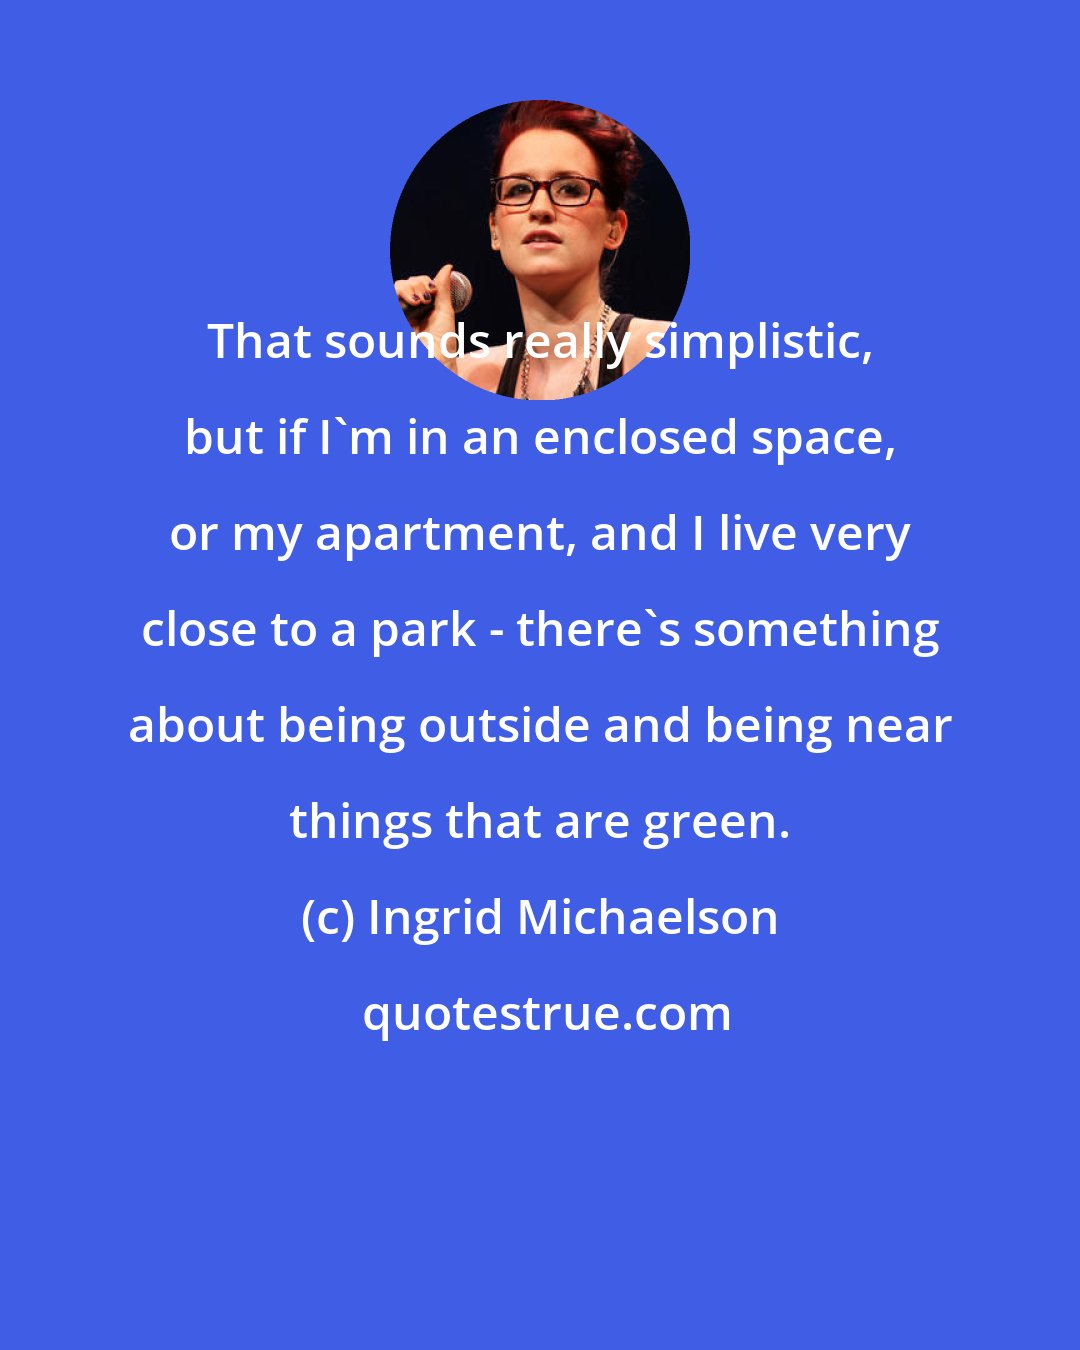 Ingrid Michaelson: That sounds really simplistic, but if I'm in an enclosed space, or my apartment, and I live very close to a park - there's something about being outside and being near things that are green.